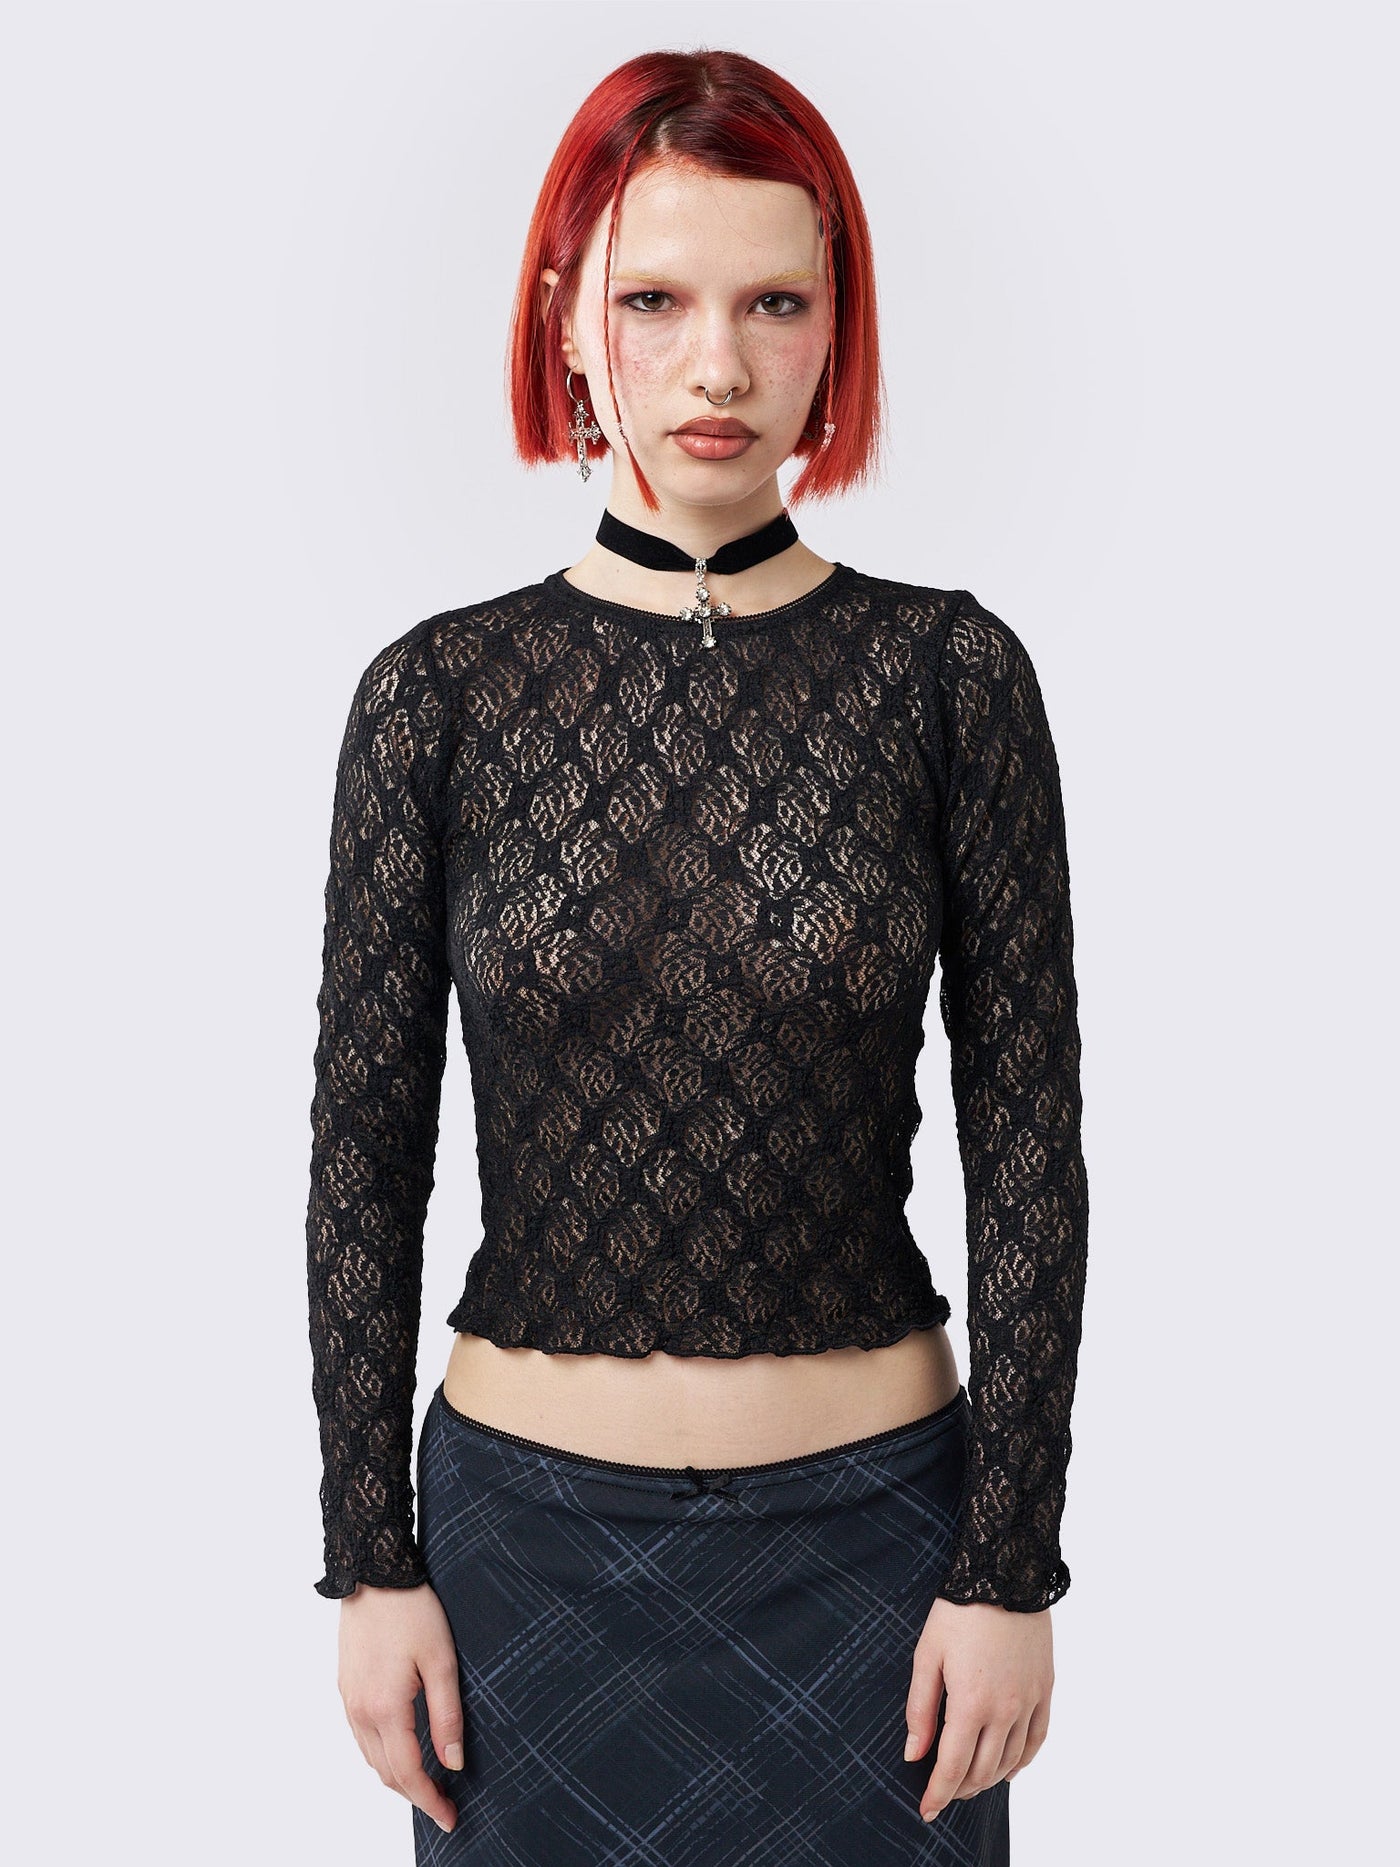 Lyra Black Floral Lace Top